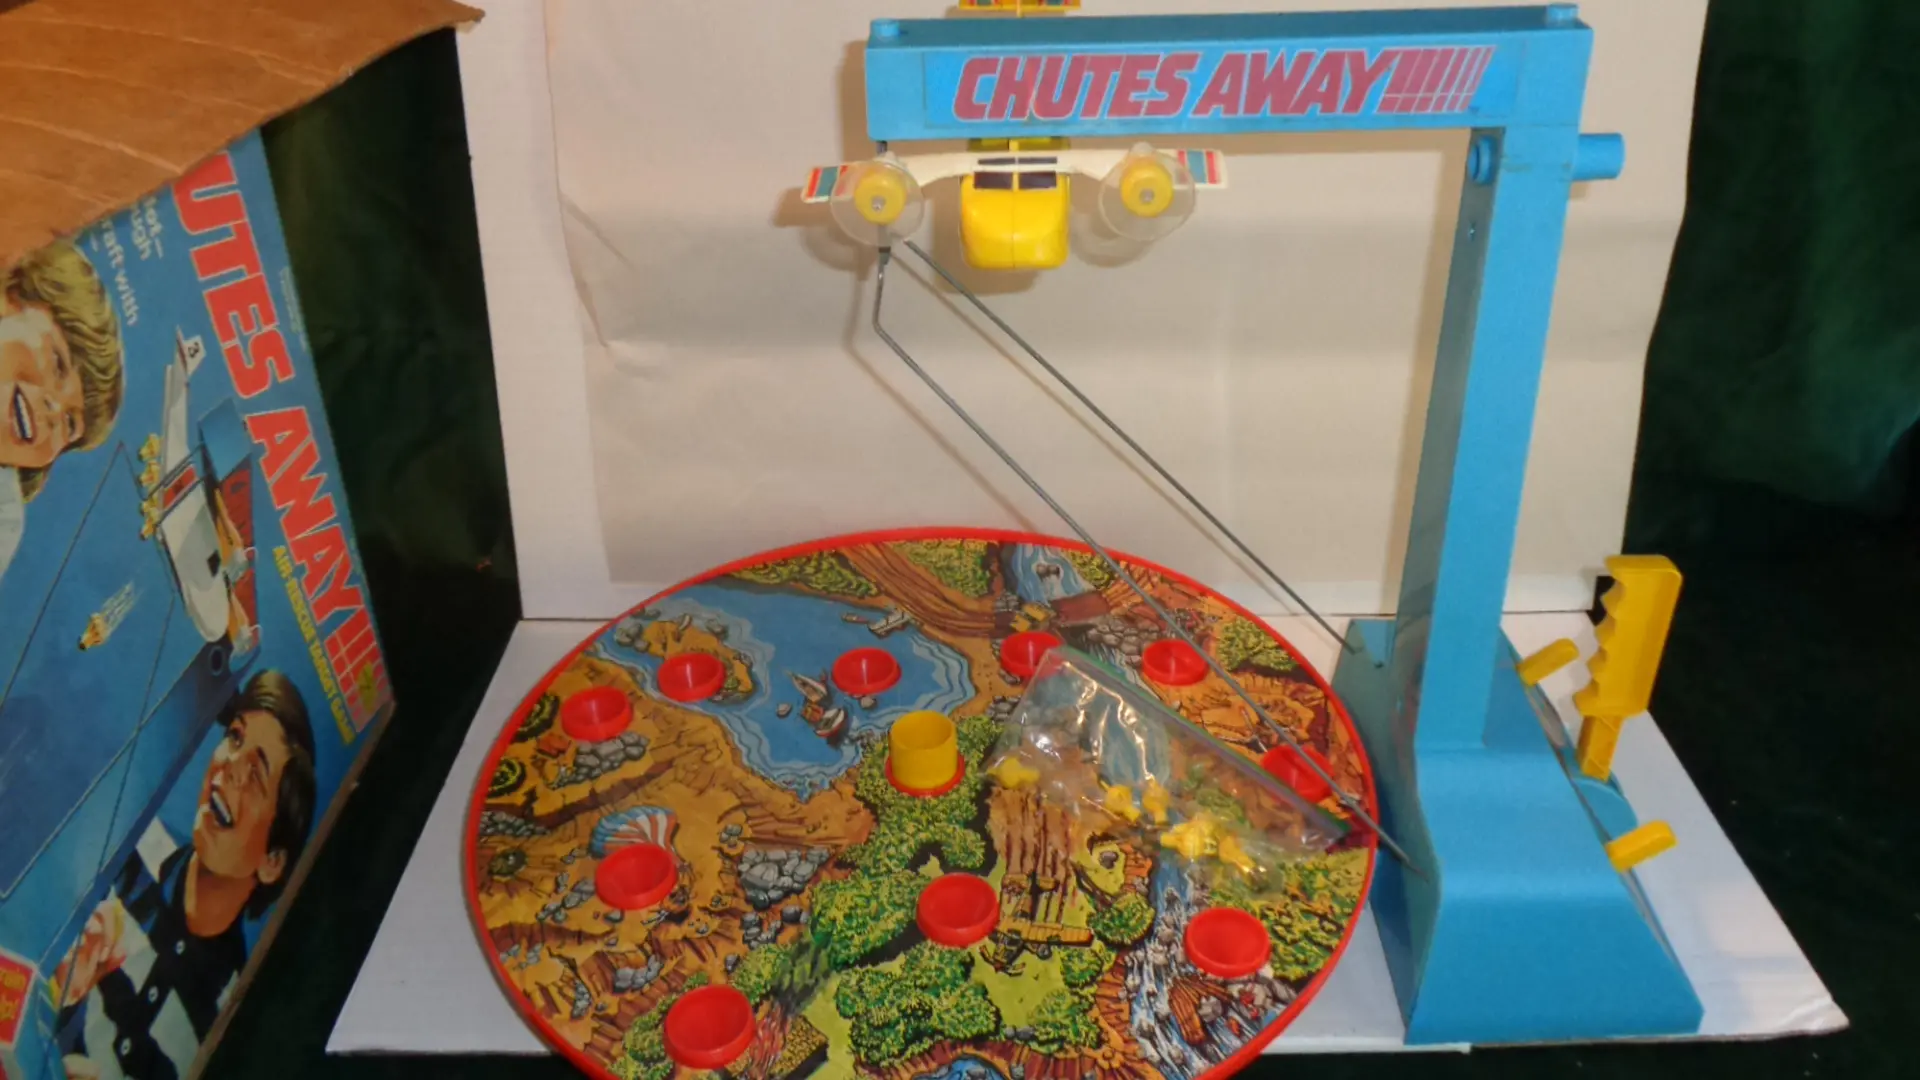 Side view of Chutes Away Air Rescue Target Game